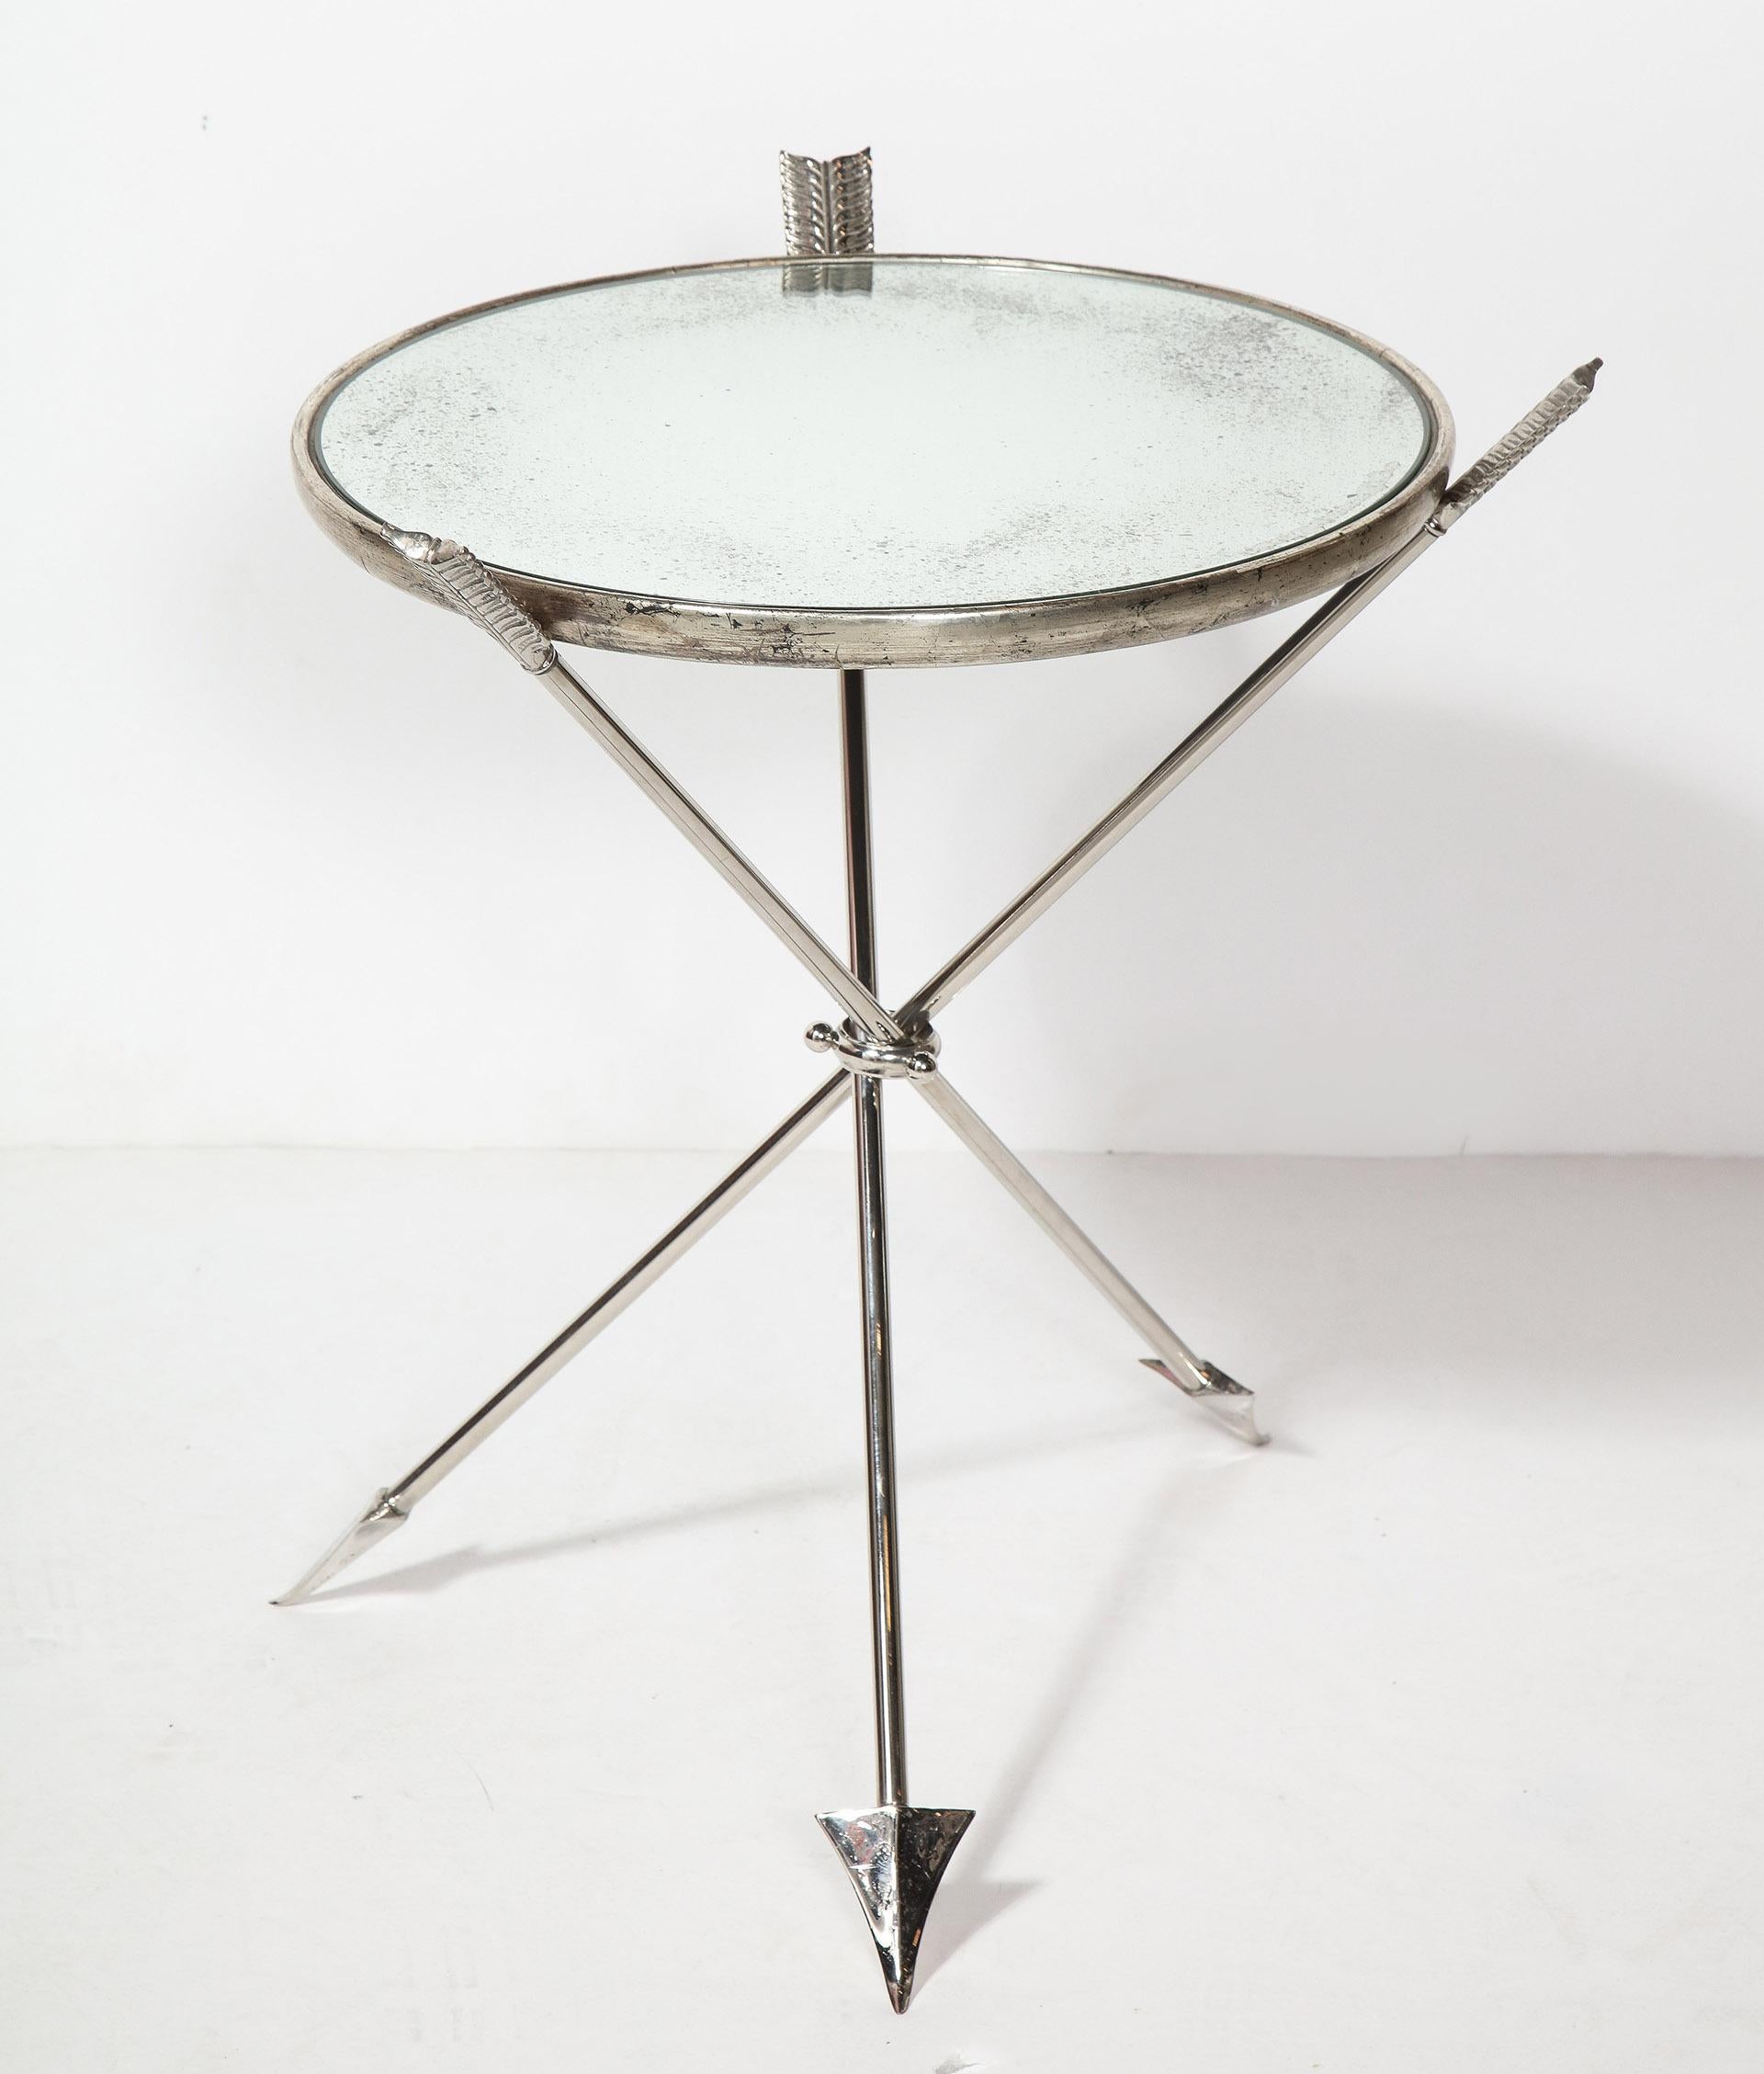 Pair of arrow form mirrored tables

The pair of tables with silver gilt framed mirrored tops supported by a tripod base, each leg in the form of an arrow.